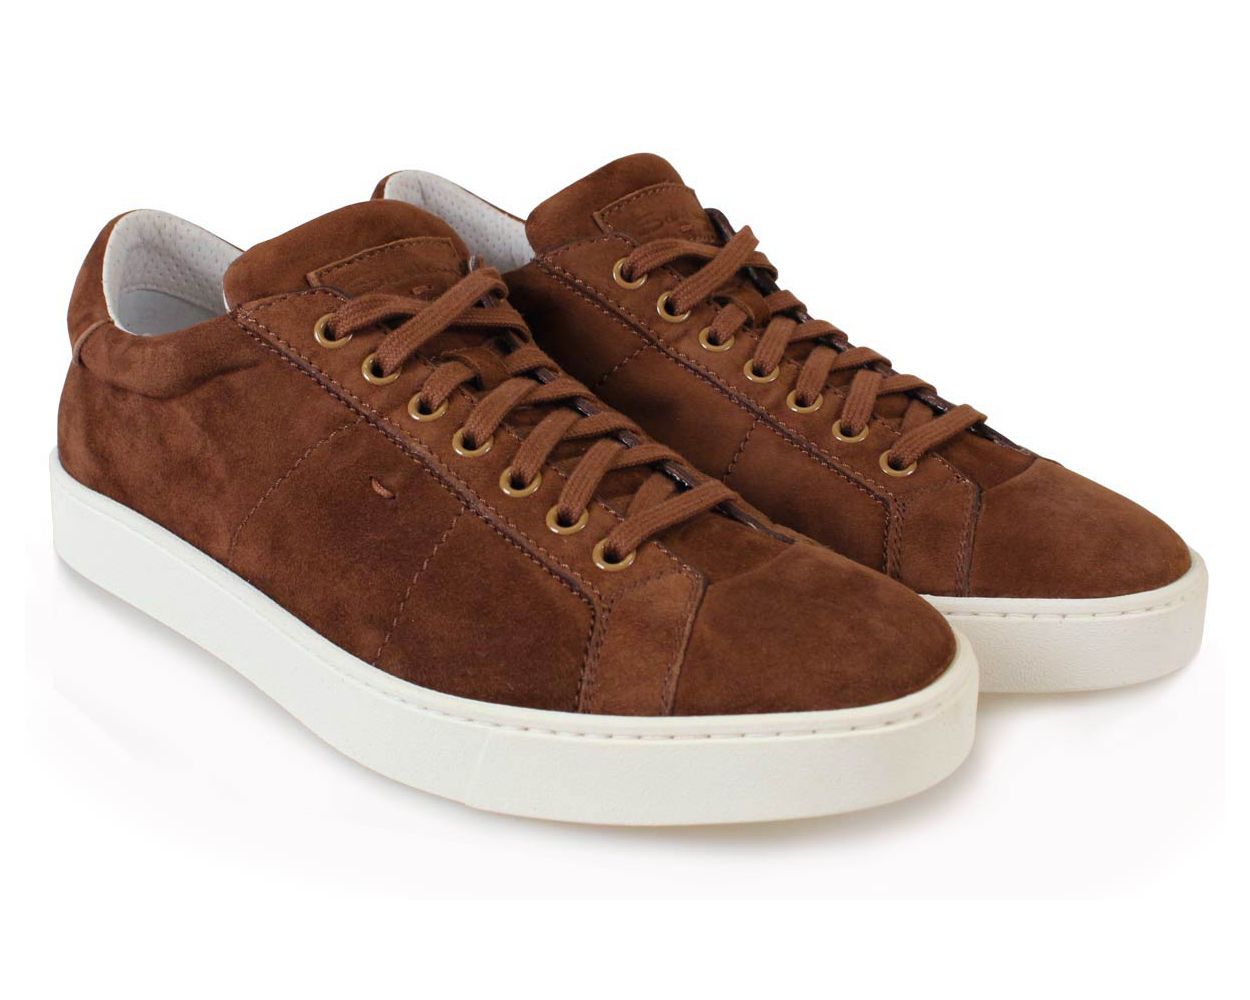 Santoni Chestnut Brown Suede Leather Trainers | Robert Old